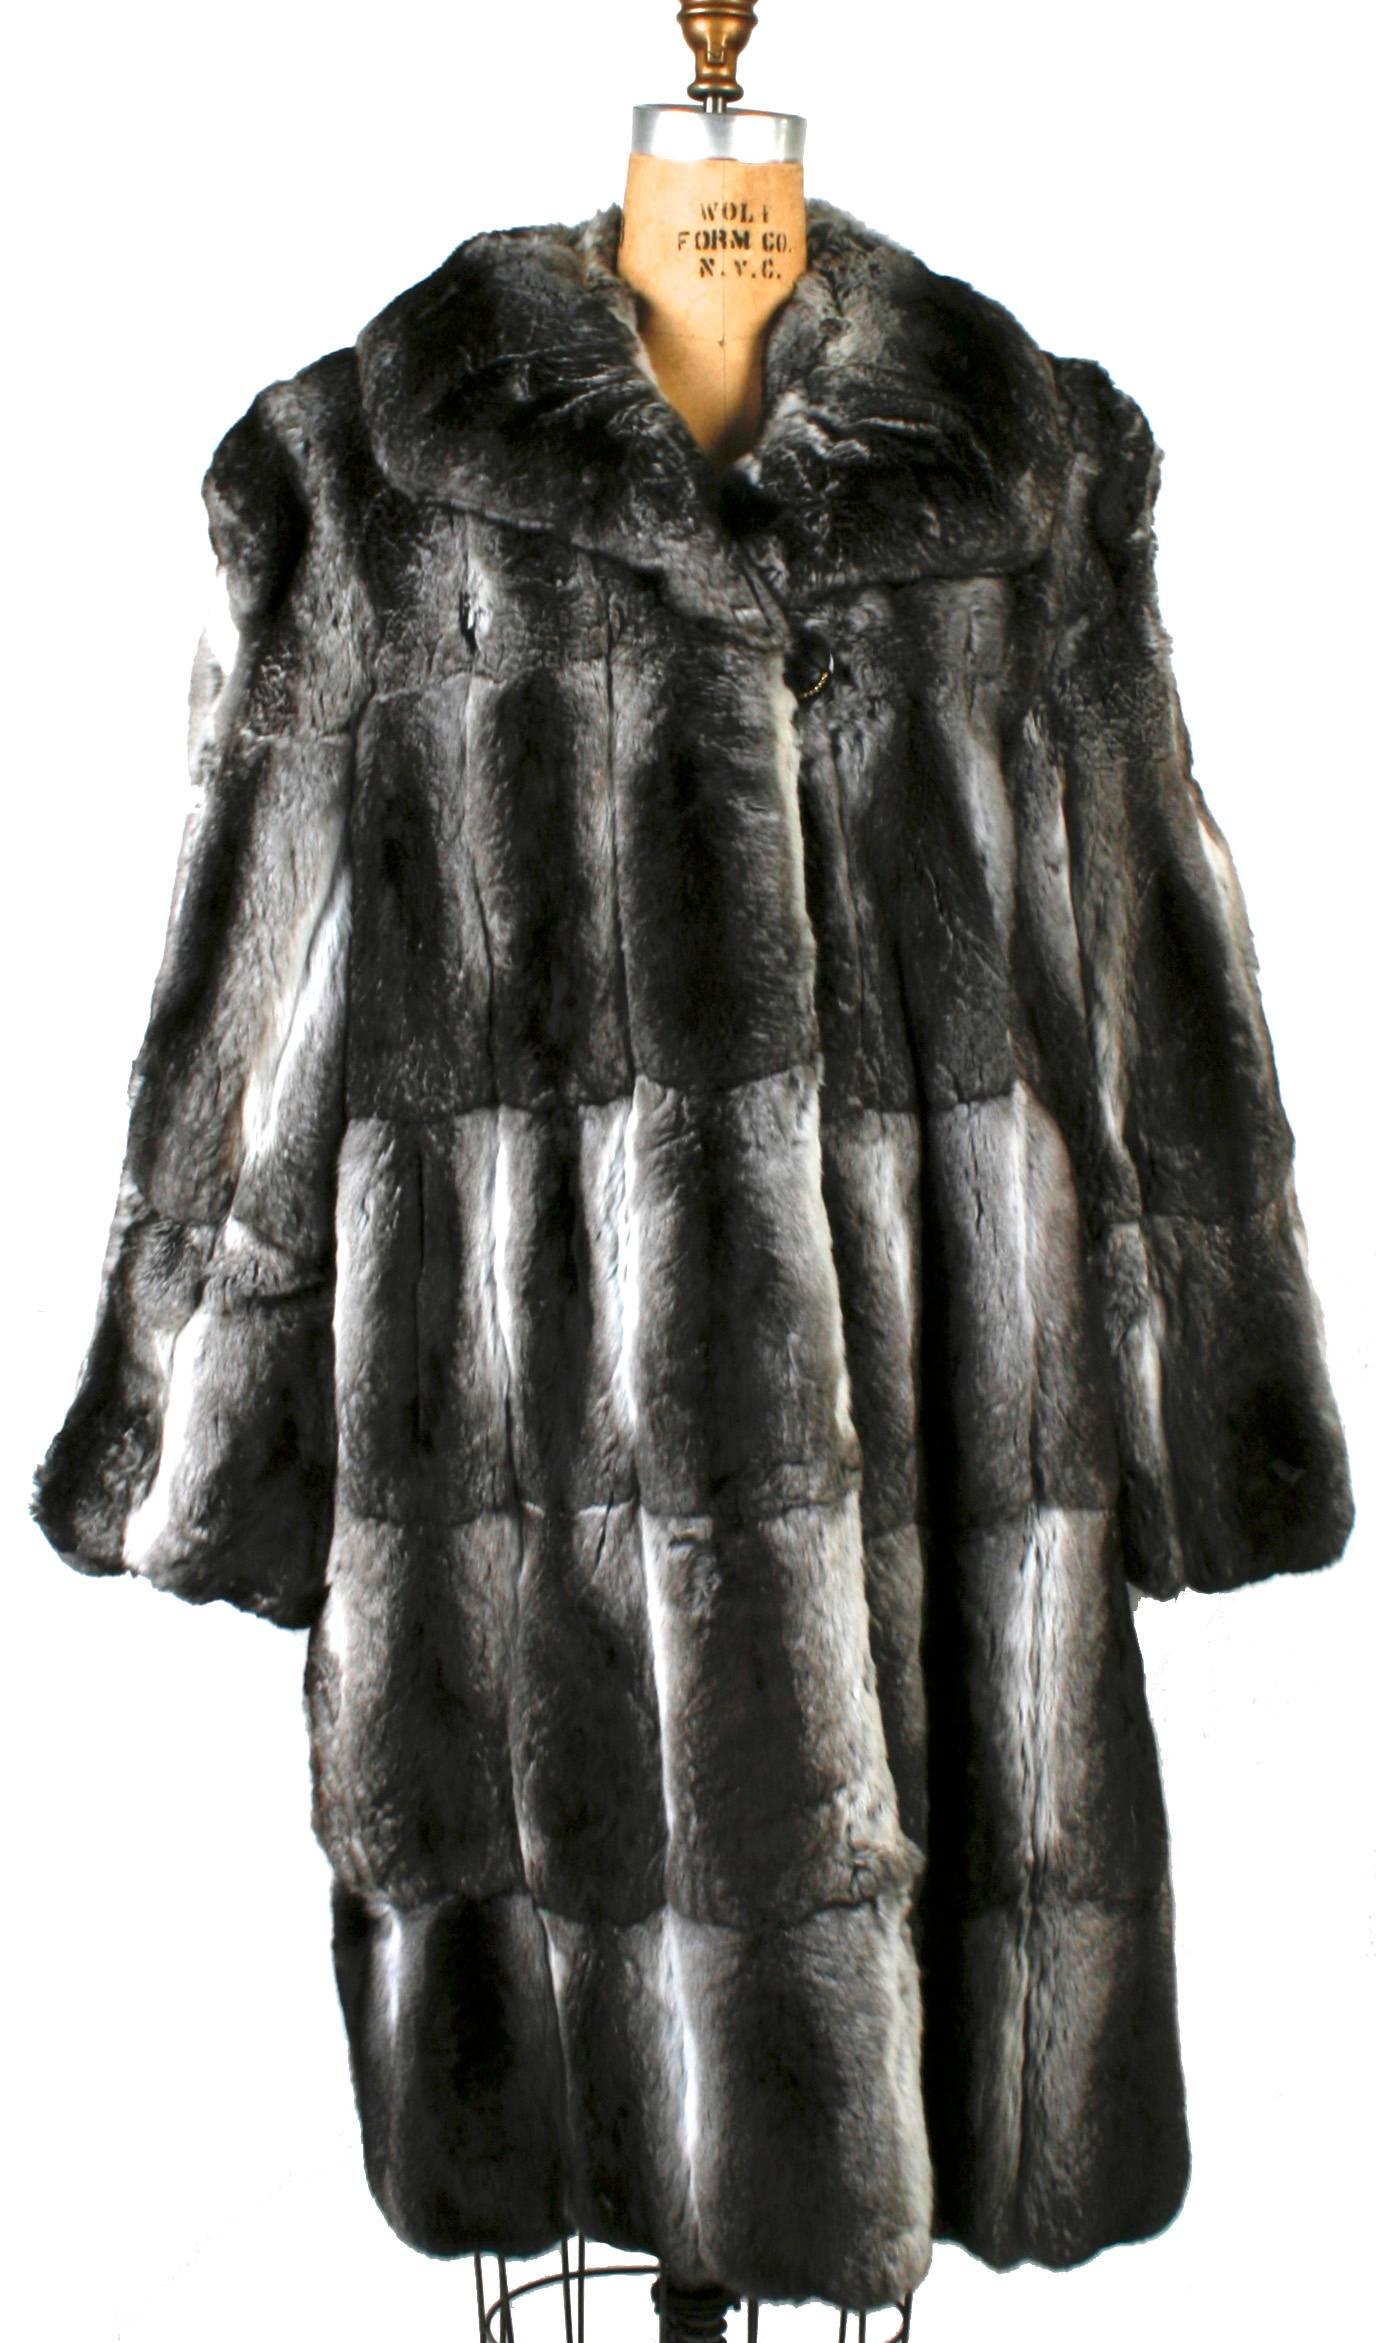 Revillon grey Chinchilla fur coat from Saks Fifth Avenue with shawl collar and a single button overlap closure. The fur coat has padded shoulders and is fully lined in black. It has one outside left-hand pocket and an interior right-hand pocket. The